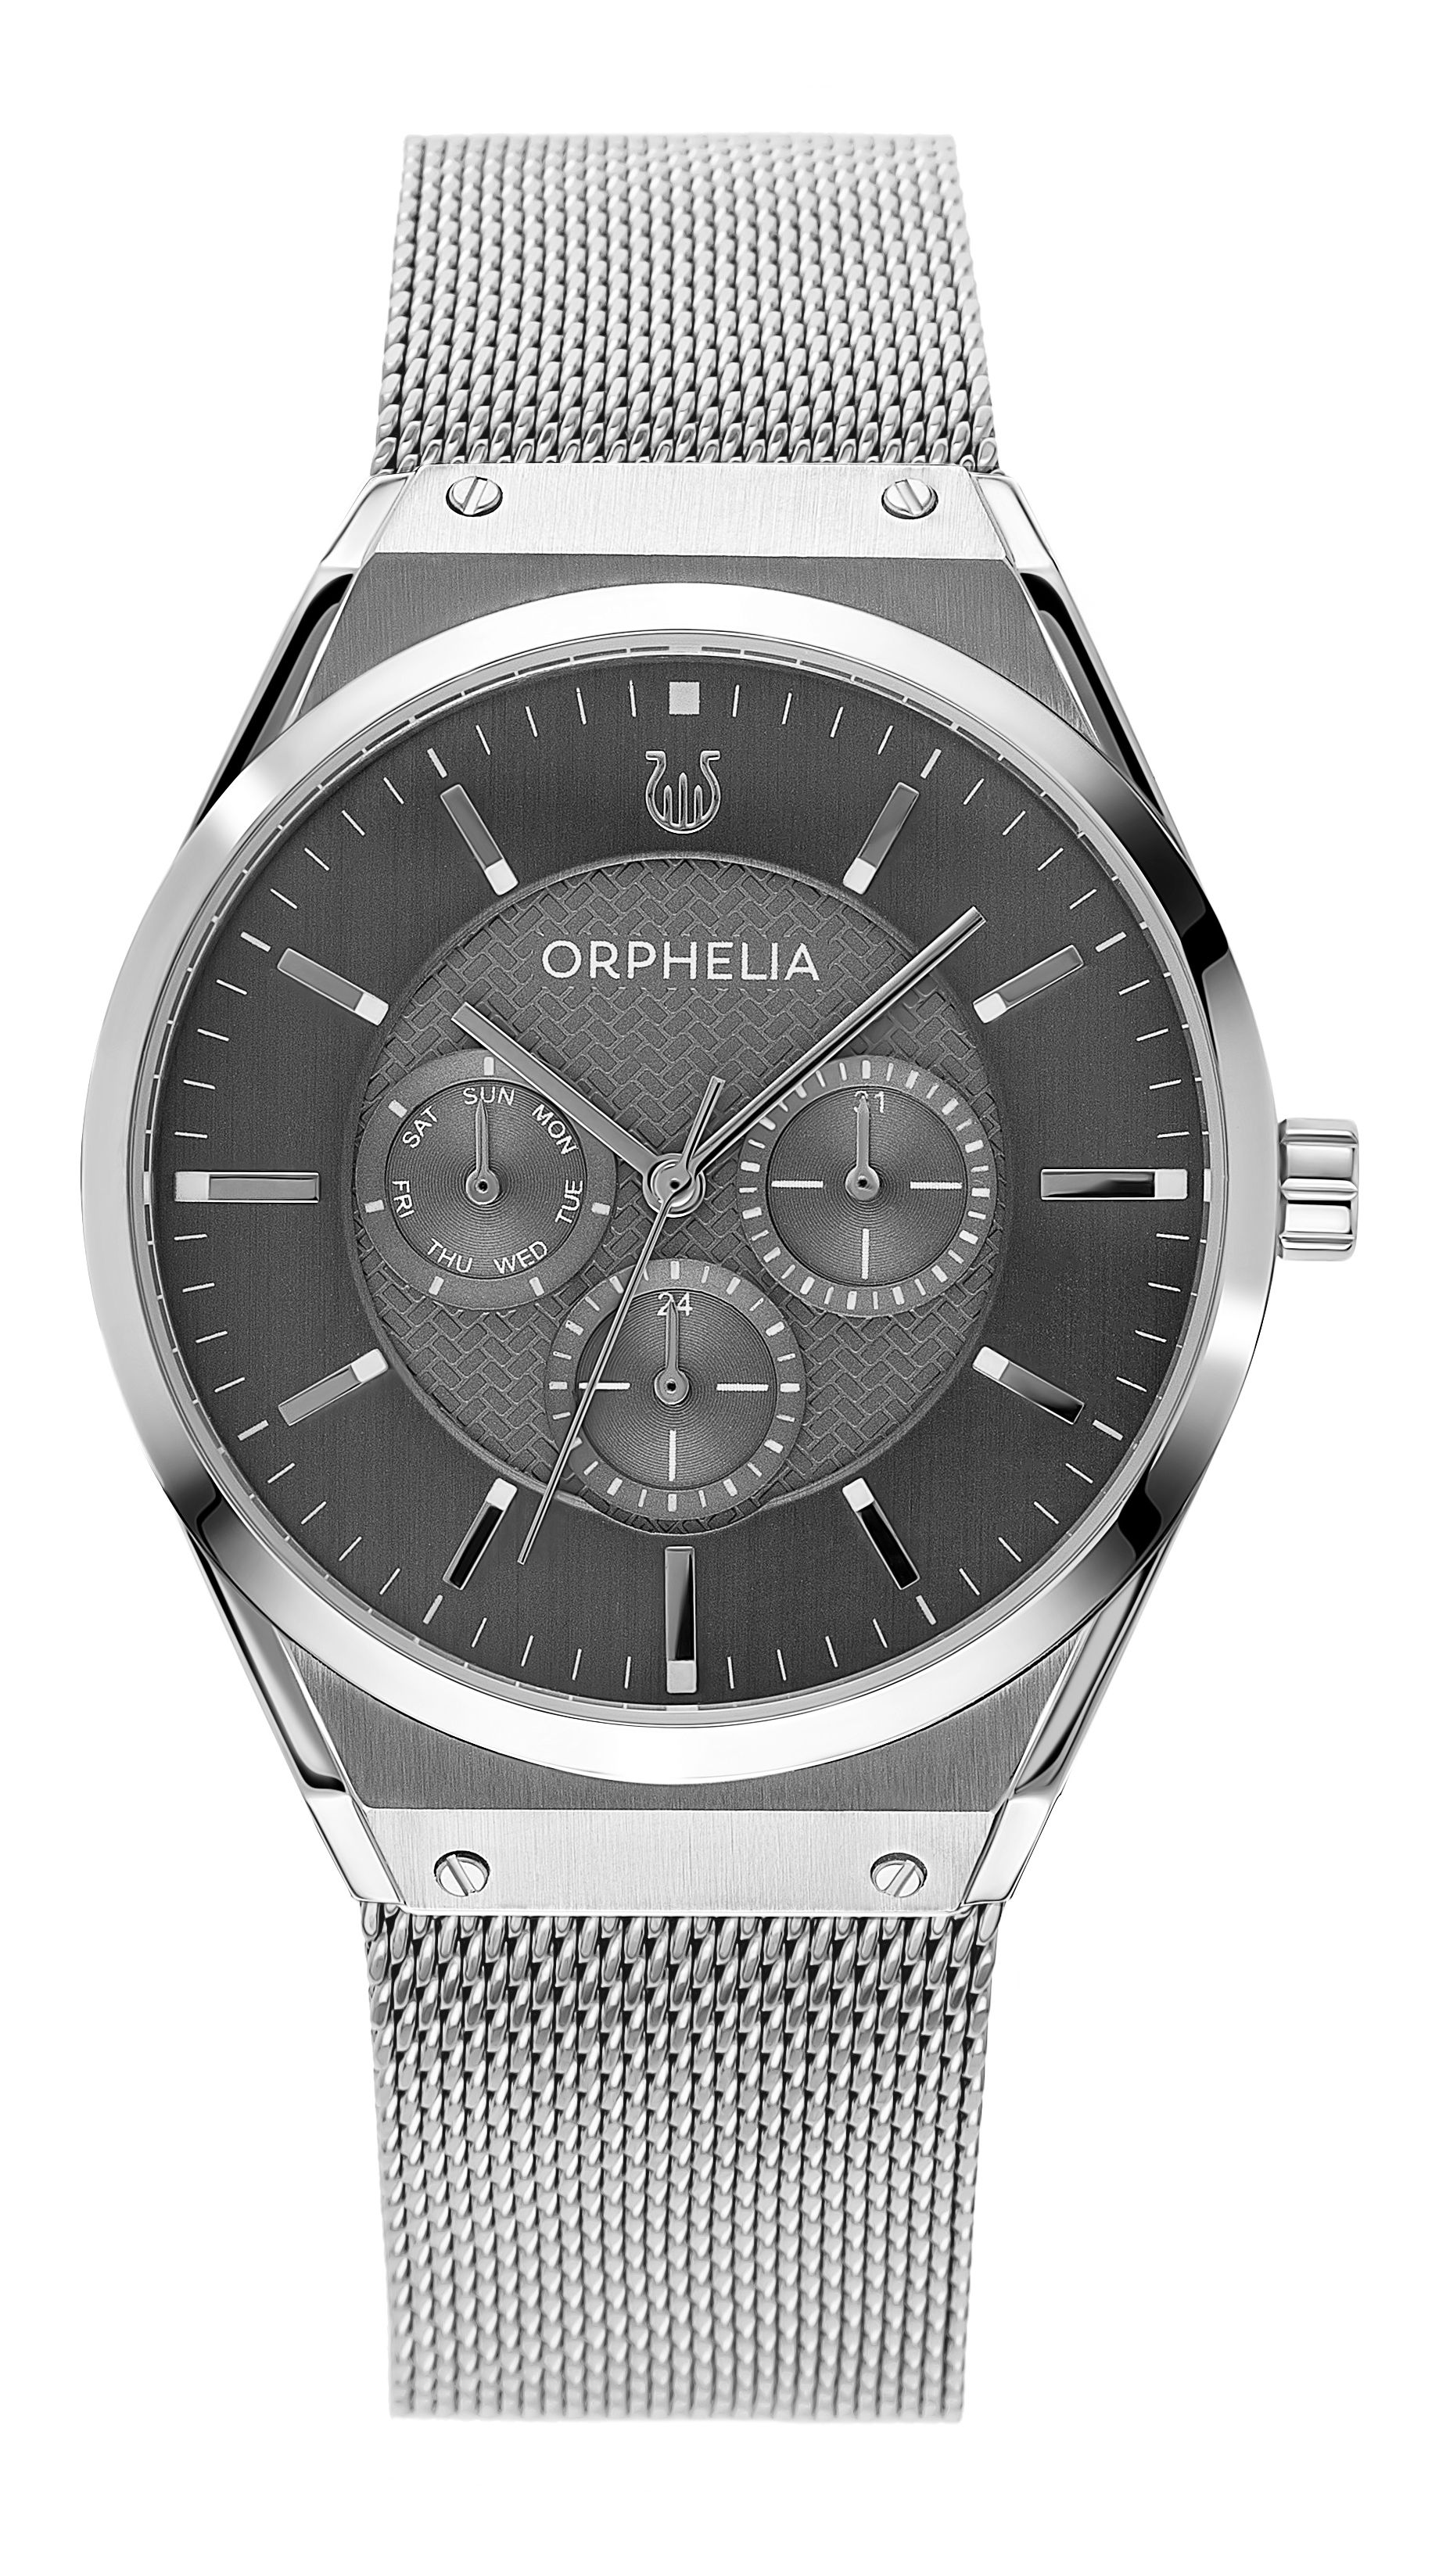 This Orphelia Saffiano Multi Dial Watch for Men is the perfect timepiece to wear or to gift. It's Silver 41 mm Round case combined with the comfortable Silver Stainless steel watch band will ensure you enjoy this stunning timepiece without any compromise. Operated by a high quality Quartz movement and water resistant to 3 bars, your watch will keep ticking. GREAT DESIGN: ORPHELIA Saffiano Multi dial  watch with a Miyota Quartz movement includes a date display and has a mesh band. This watch features a 24 hour display. Perfect for parties, date nights and wearing in the office. PREMIUM QUALITY: By using high-quality materials  Glass: Mineral Glass  Case material: Stainless steel  Bracelet material: Stainless steel- Water resistant: 3 bars COMPACT SIZE: Case diameter: 41 mm  Height: 9 mm  Strap- Length: 22 cm  Width: 20 mm. Due to this practical handy size  the watch is absolutely for everyday use-Weight: 91 g